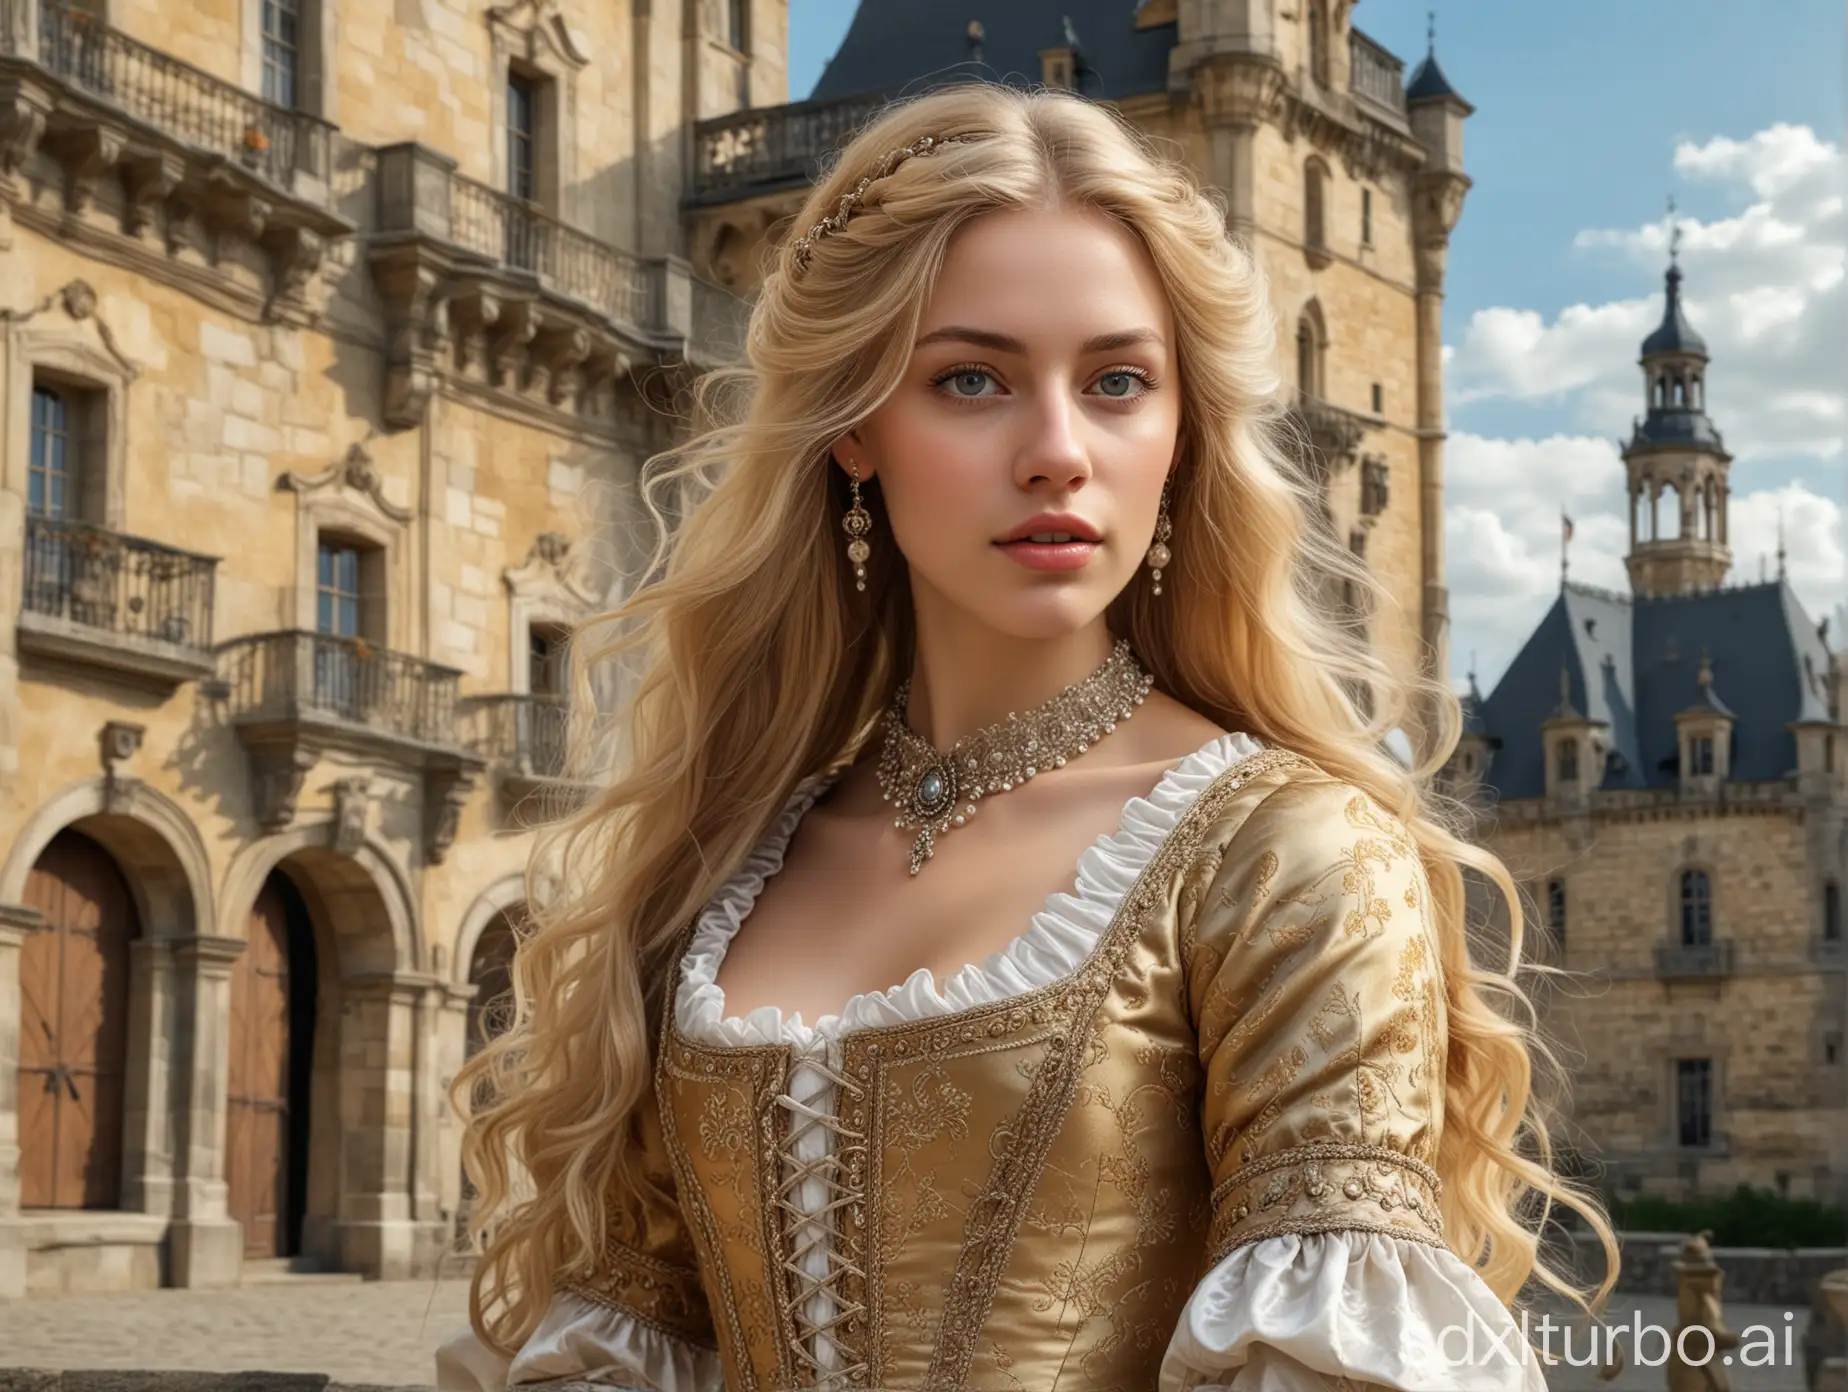 Portrait of a young blonde woman with long hair, in baroque clothing, in front of a castle, very detailed, hyper-realistic